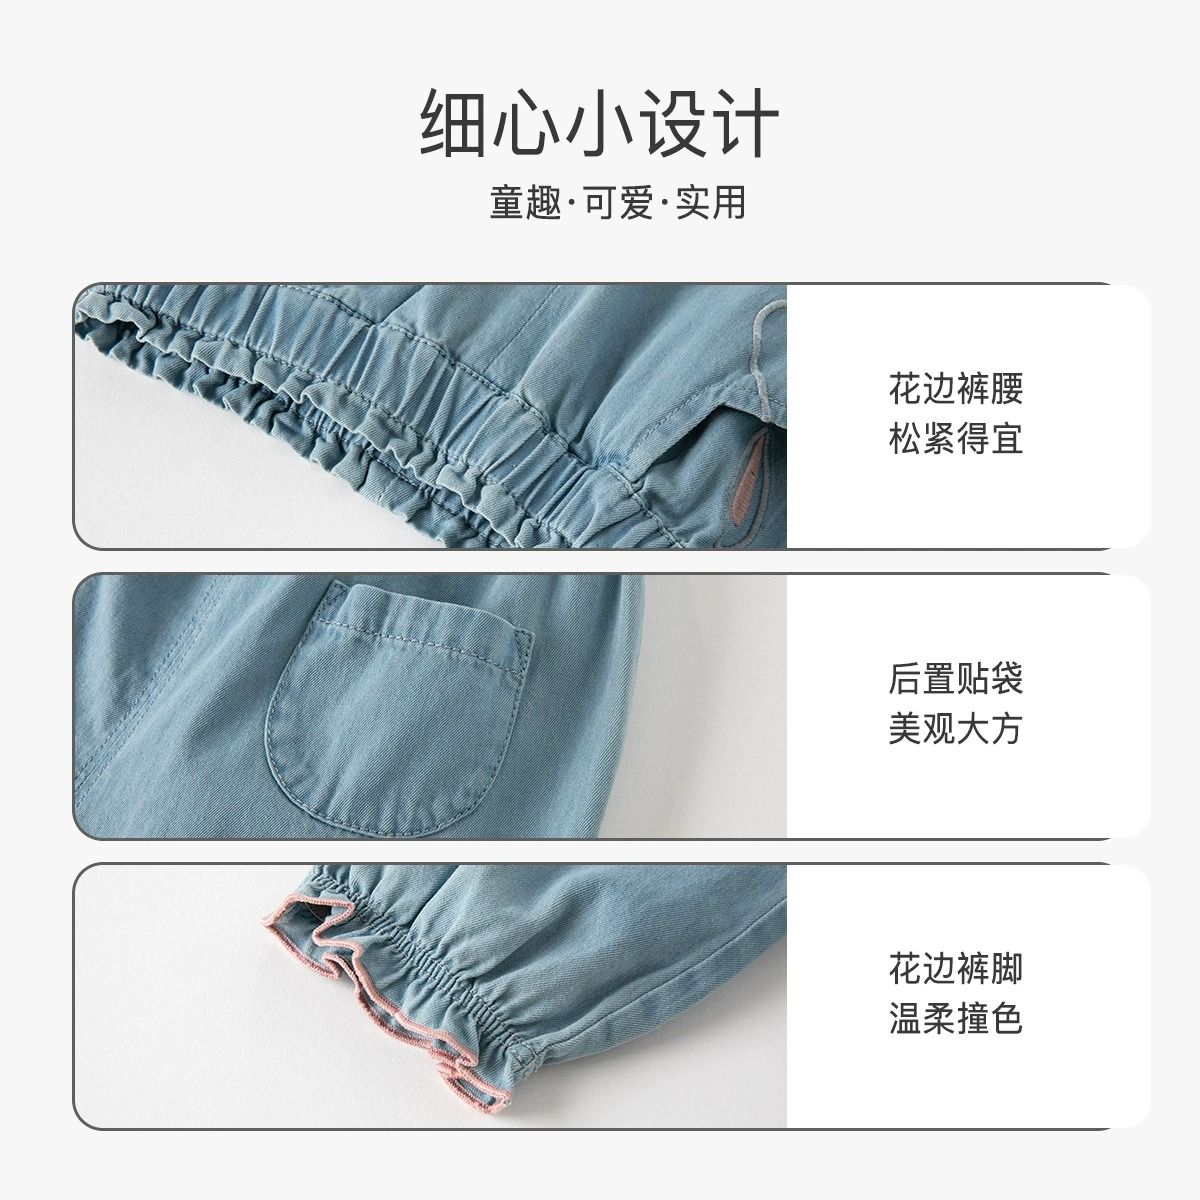 Girls' jeans spring and autumn new Korean style children's and baby's fashionable embroidered casual pants leggings trousers children's clothing